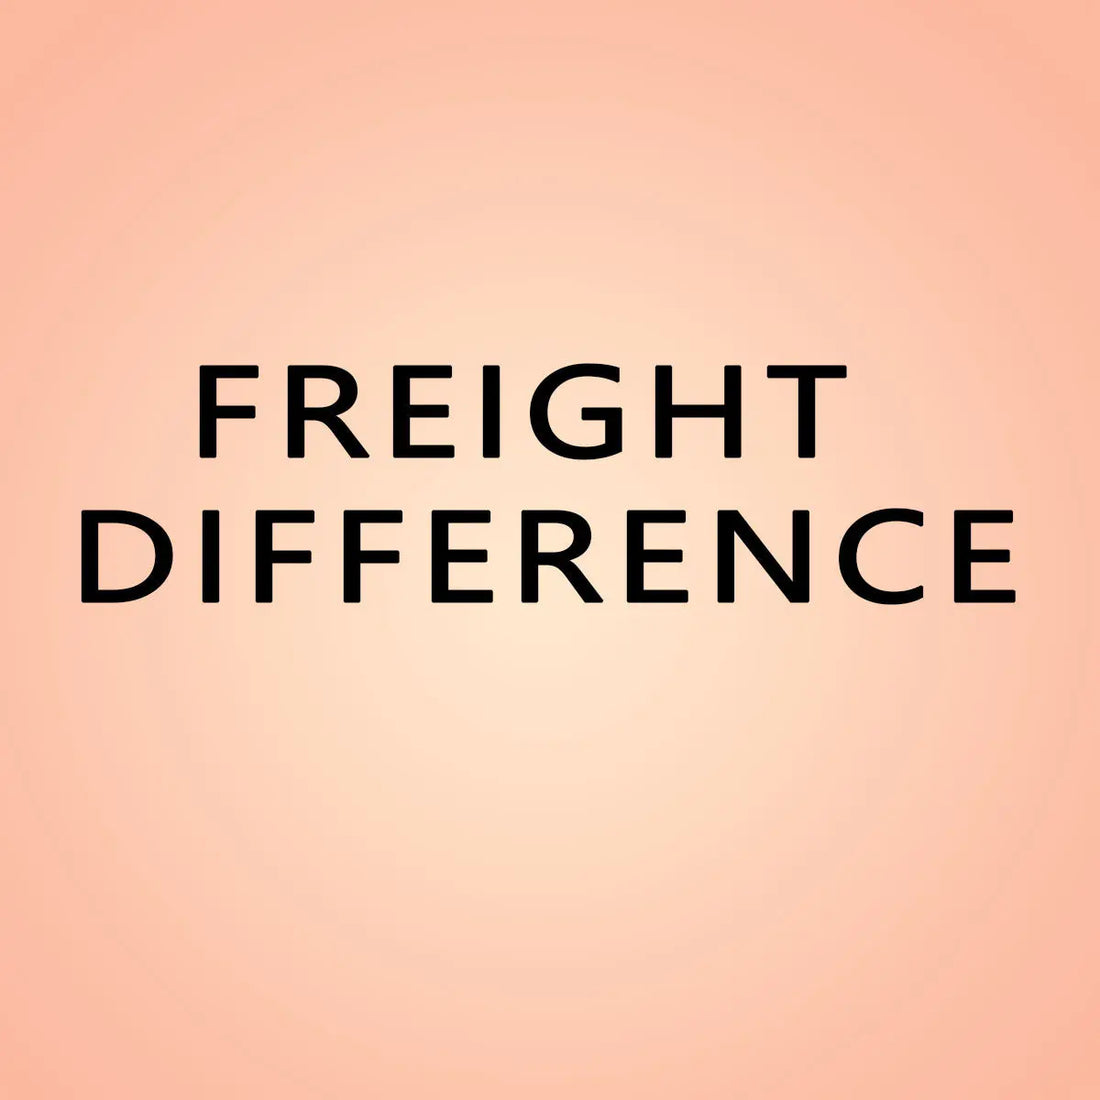 Freight difference LEIZILEI